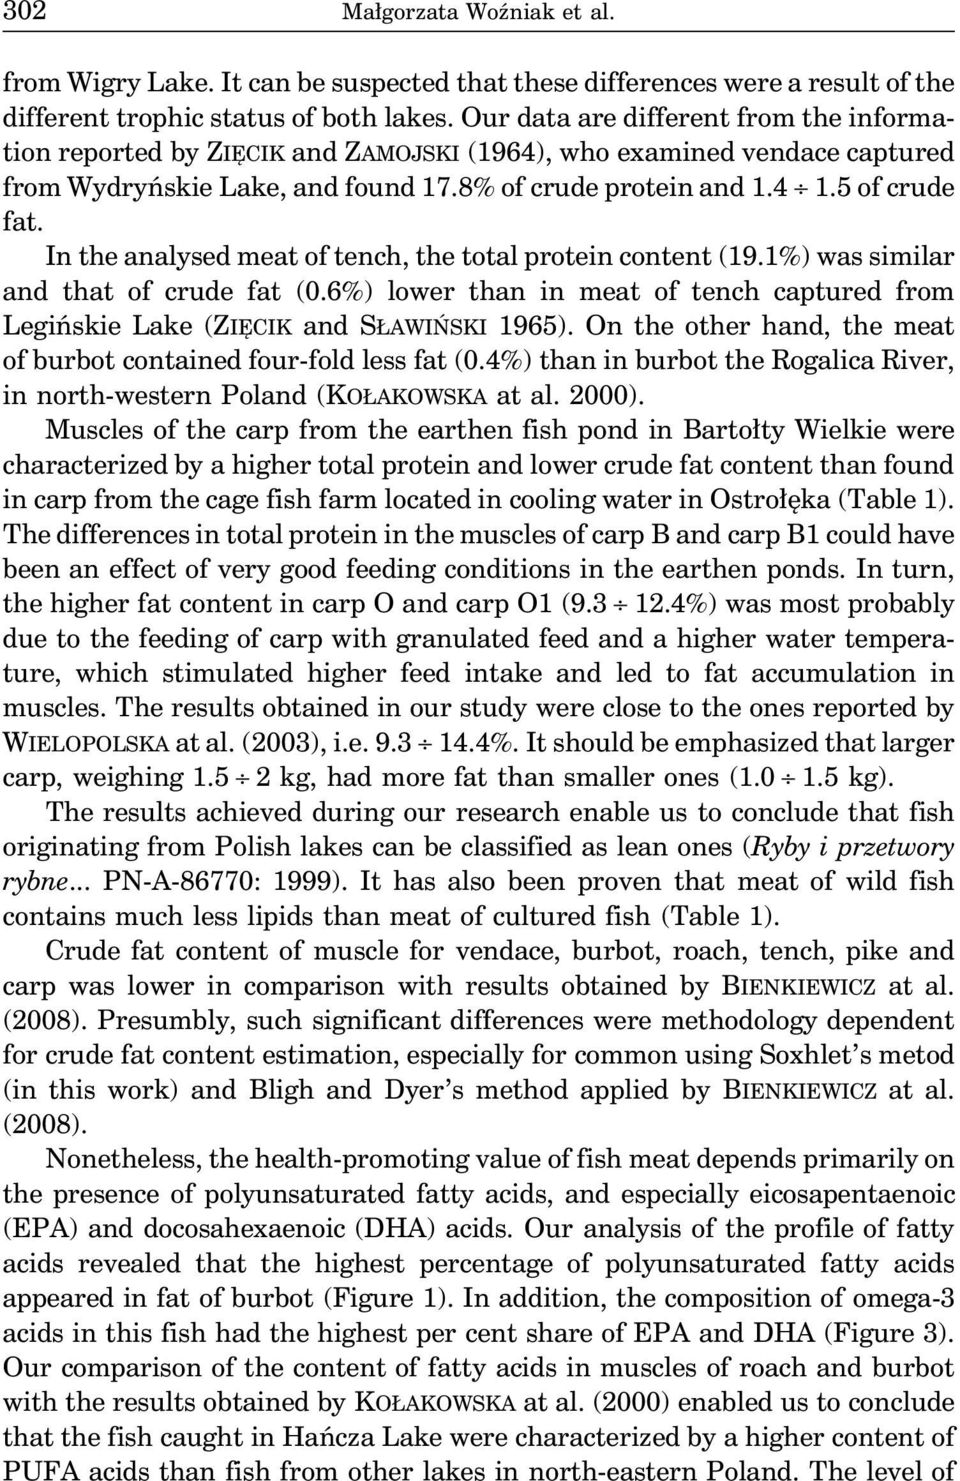 In the analysed meat of tench, the total protein content (19.1%) was similar and that of crude fat (0.6%) lower than in meat of tench captured from Legińskie Lake (ZIĘCIK and SŁAWIŃSKI 1965).